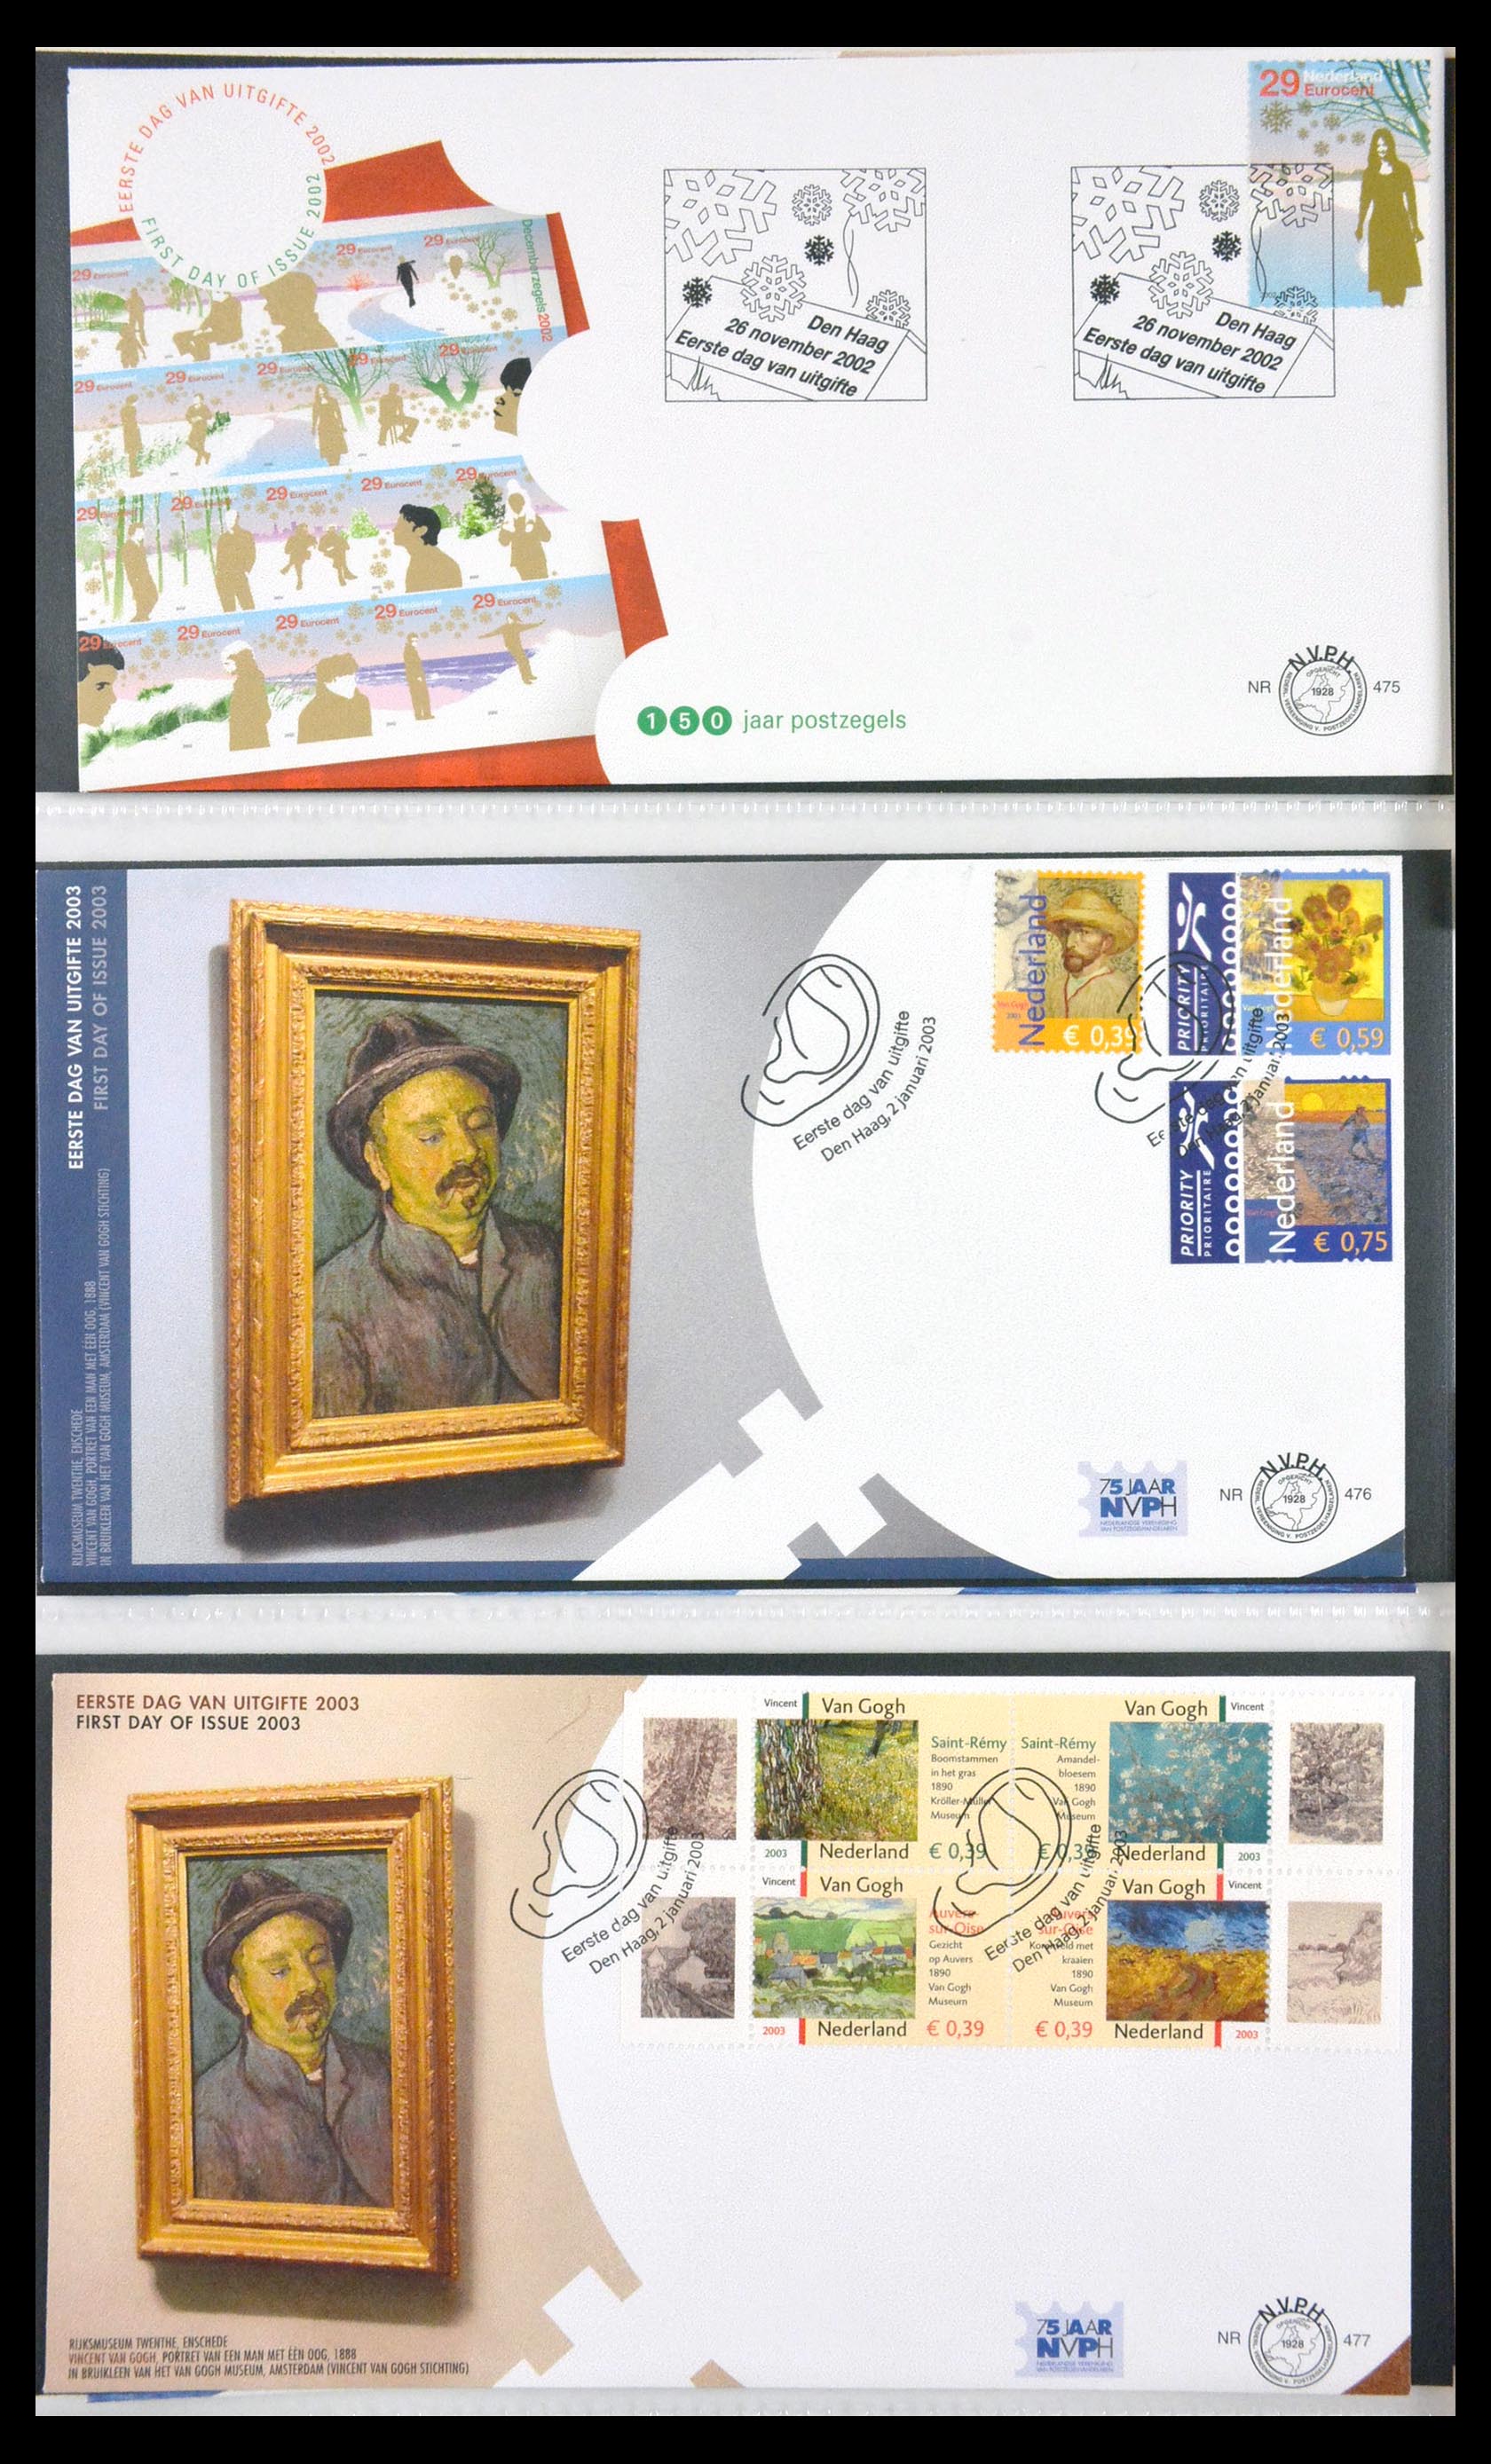 29666 049 - 29666 Netherlands 1997-2011 FDC's.